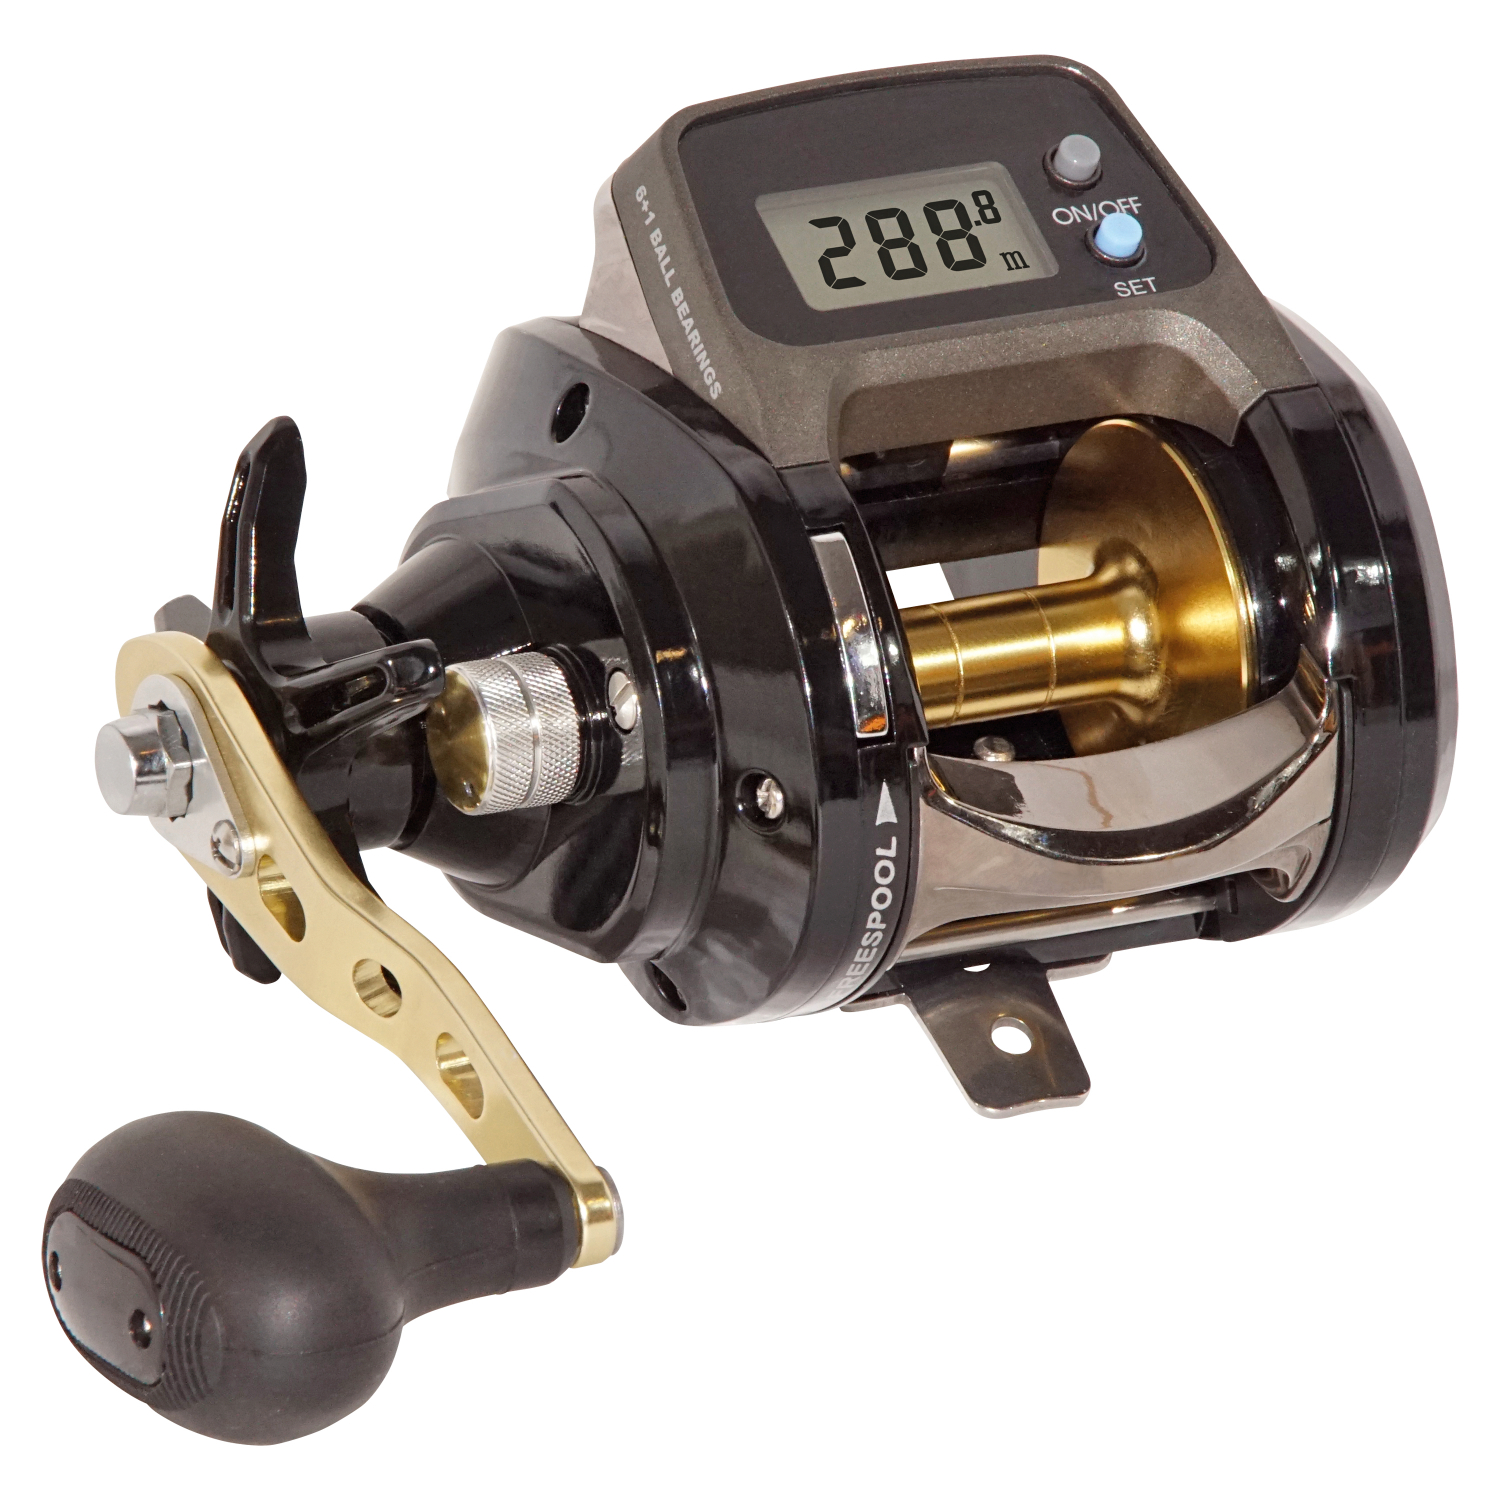 WFT Multiplier Reel 865LCLH at low prices